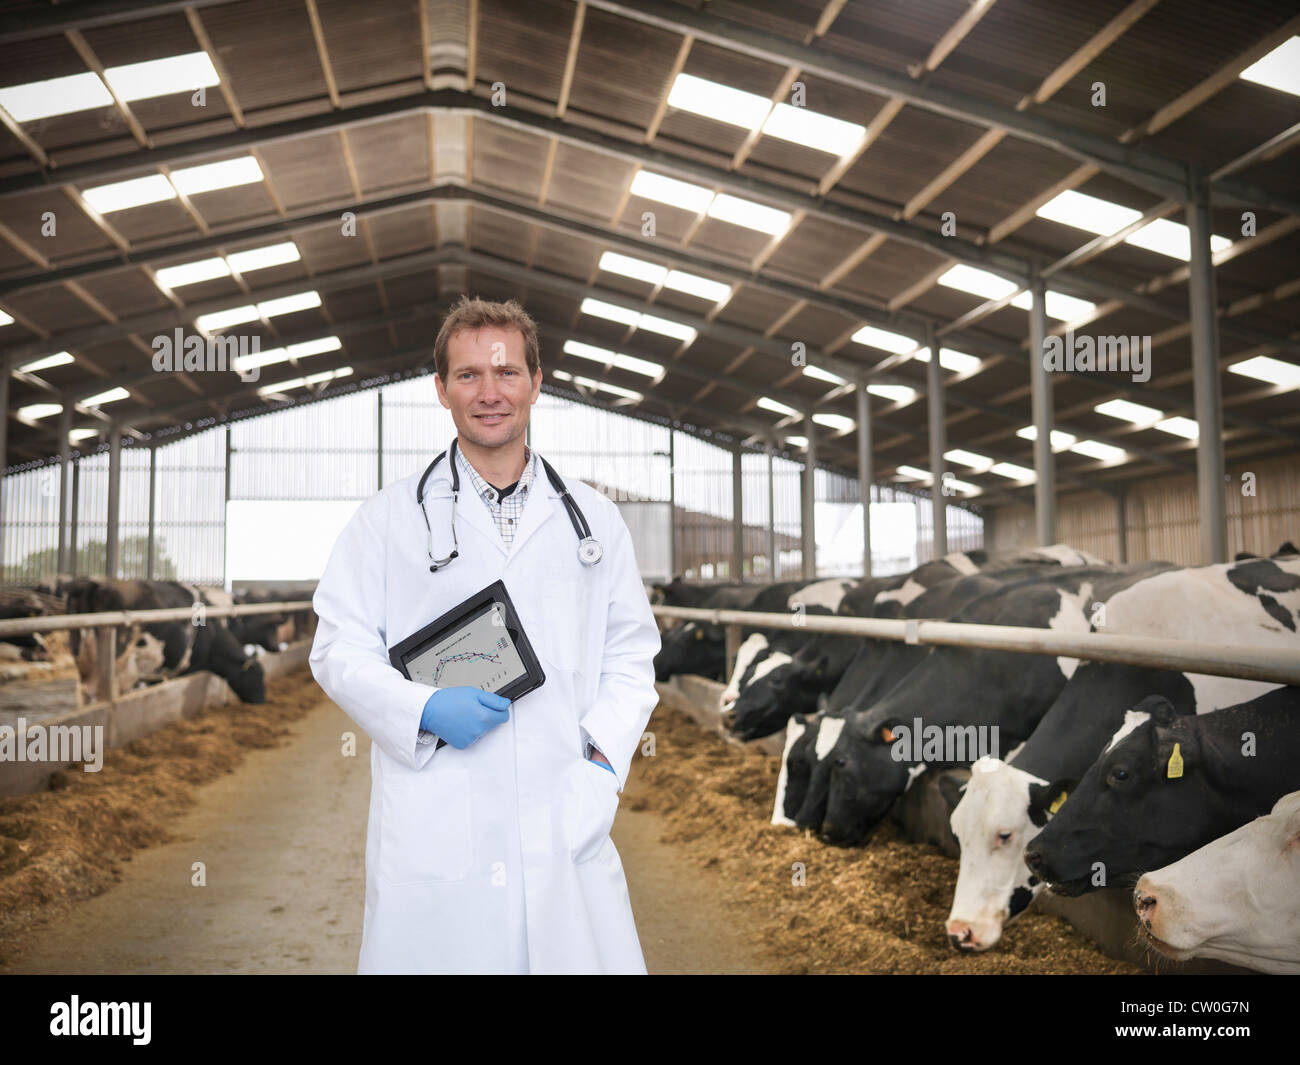 Veterinarian with tablet computer Stock Photo